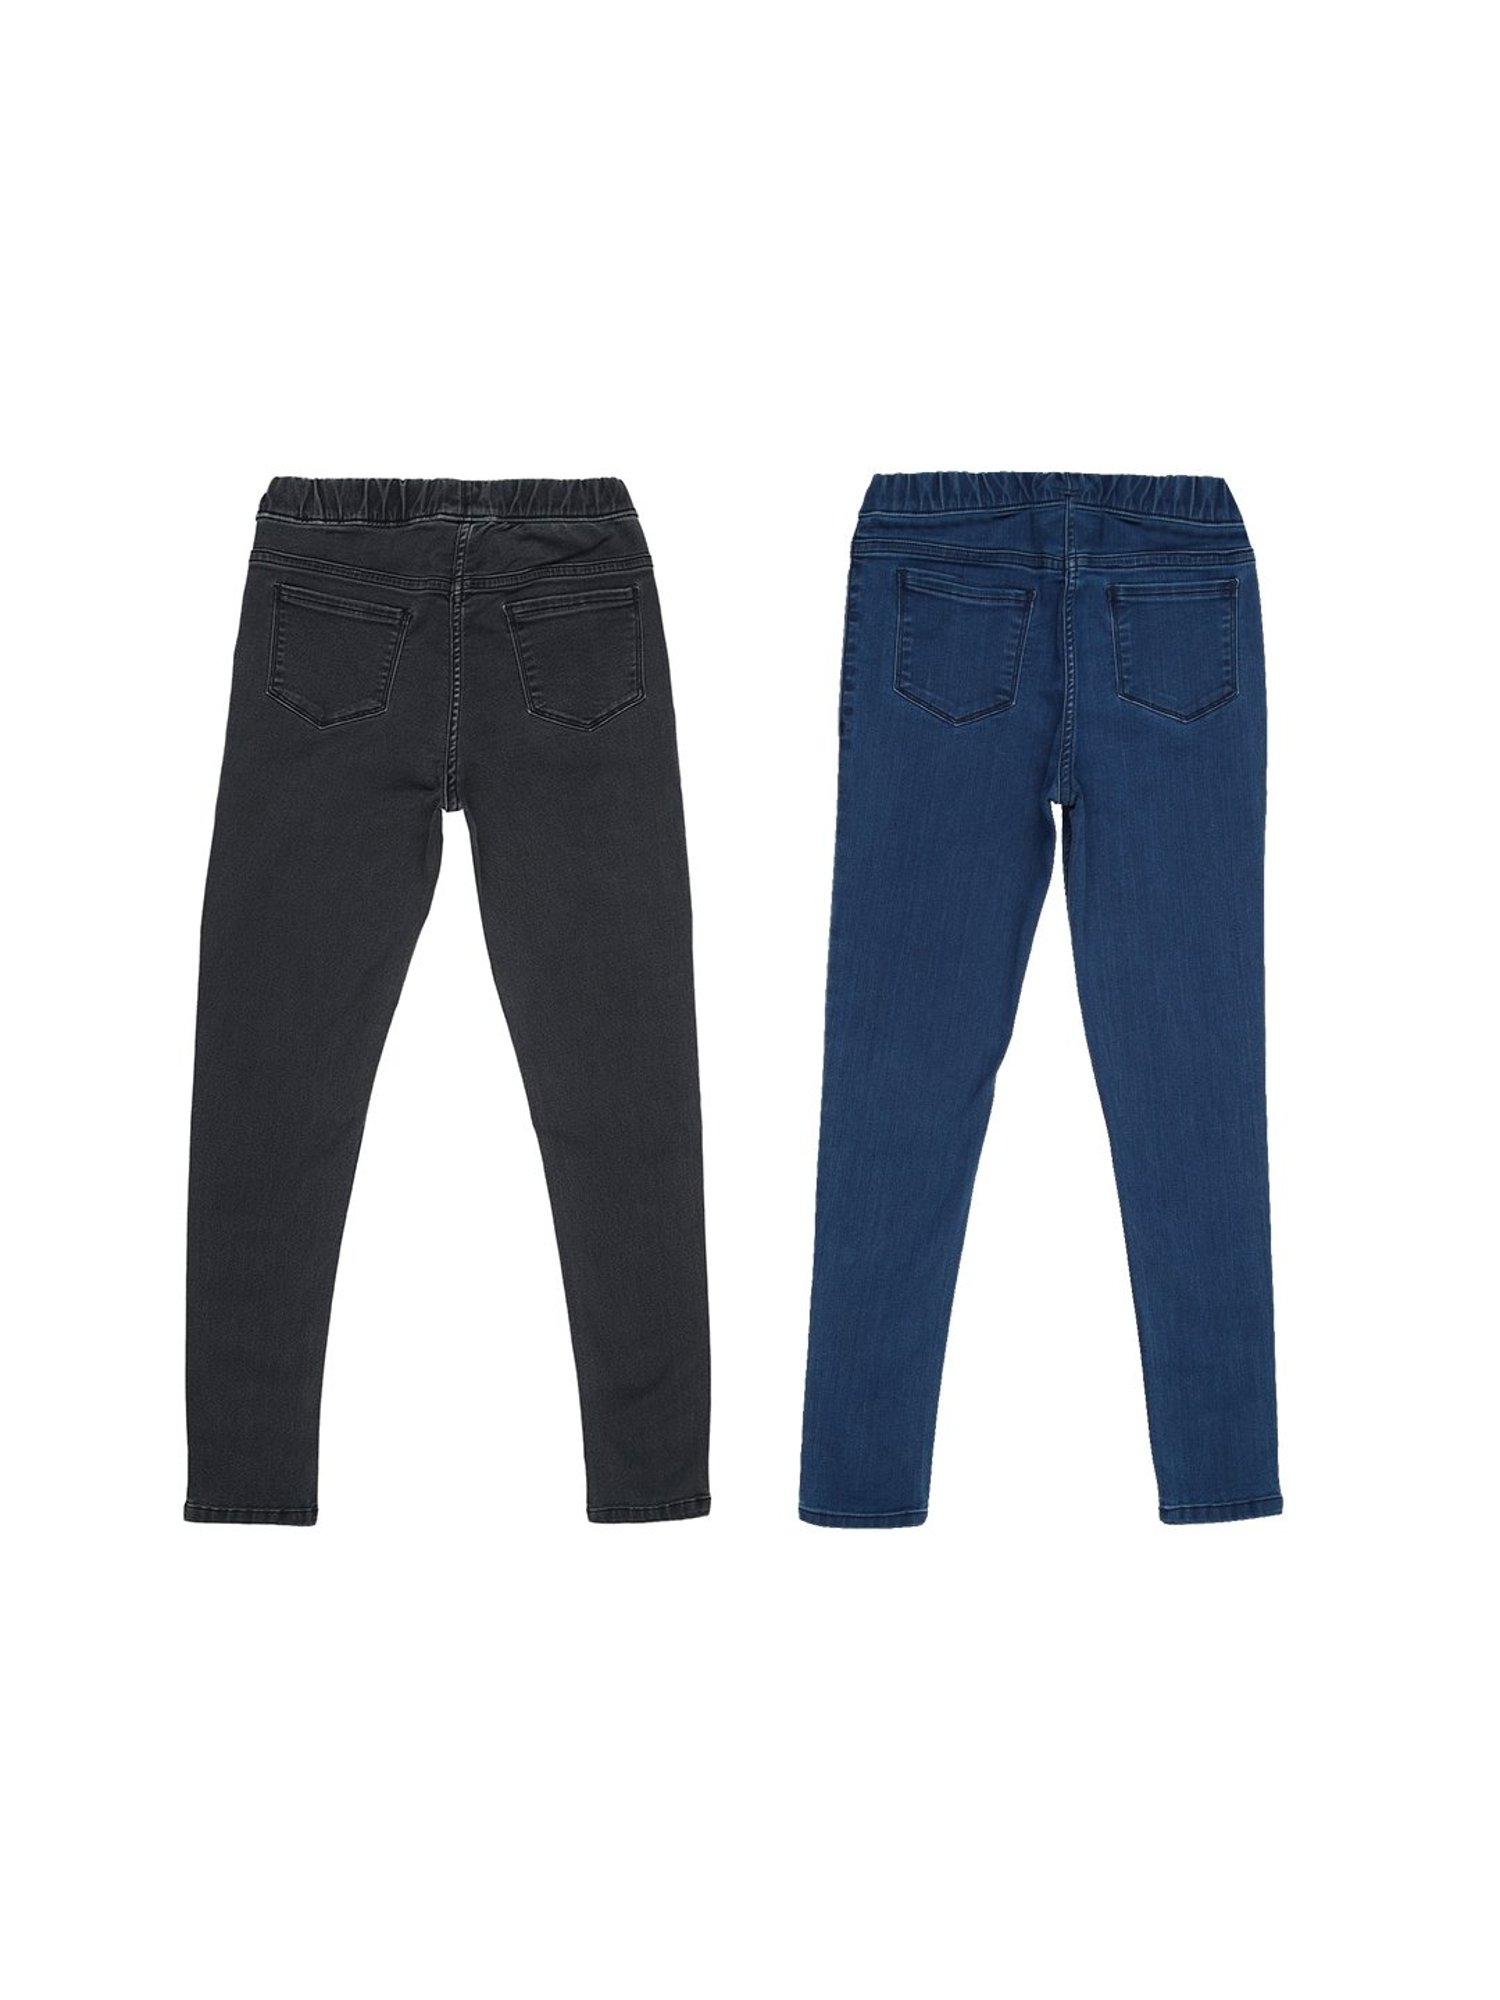 Peter England Kids Jeans, Multi Pack of Two Jeggings for Girls at  peterengland.abfrl.in